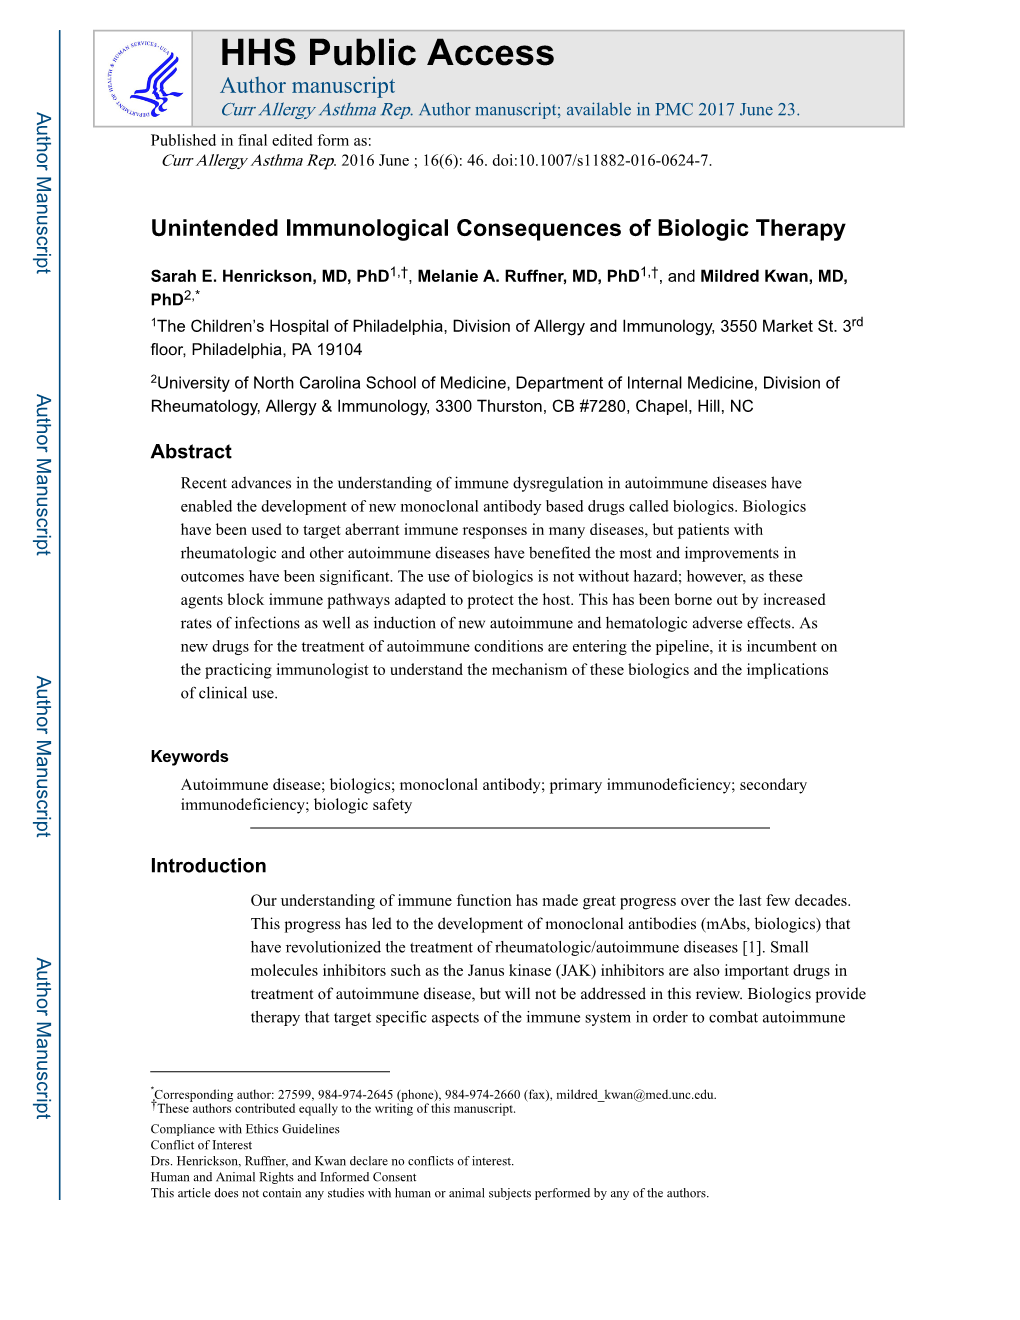 Unintended Immunological Consequences of Biologic Therapy